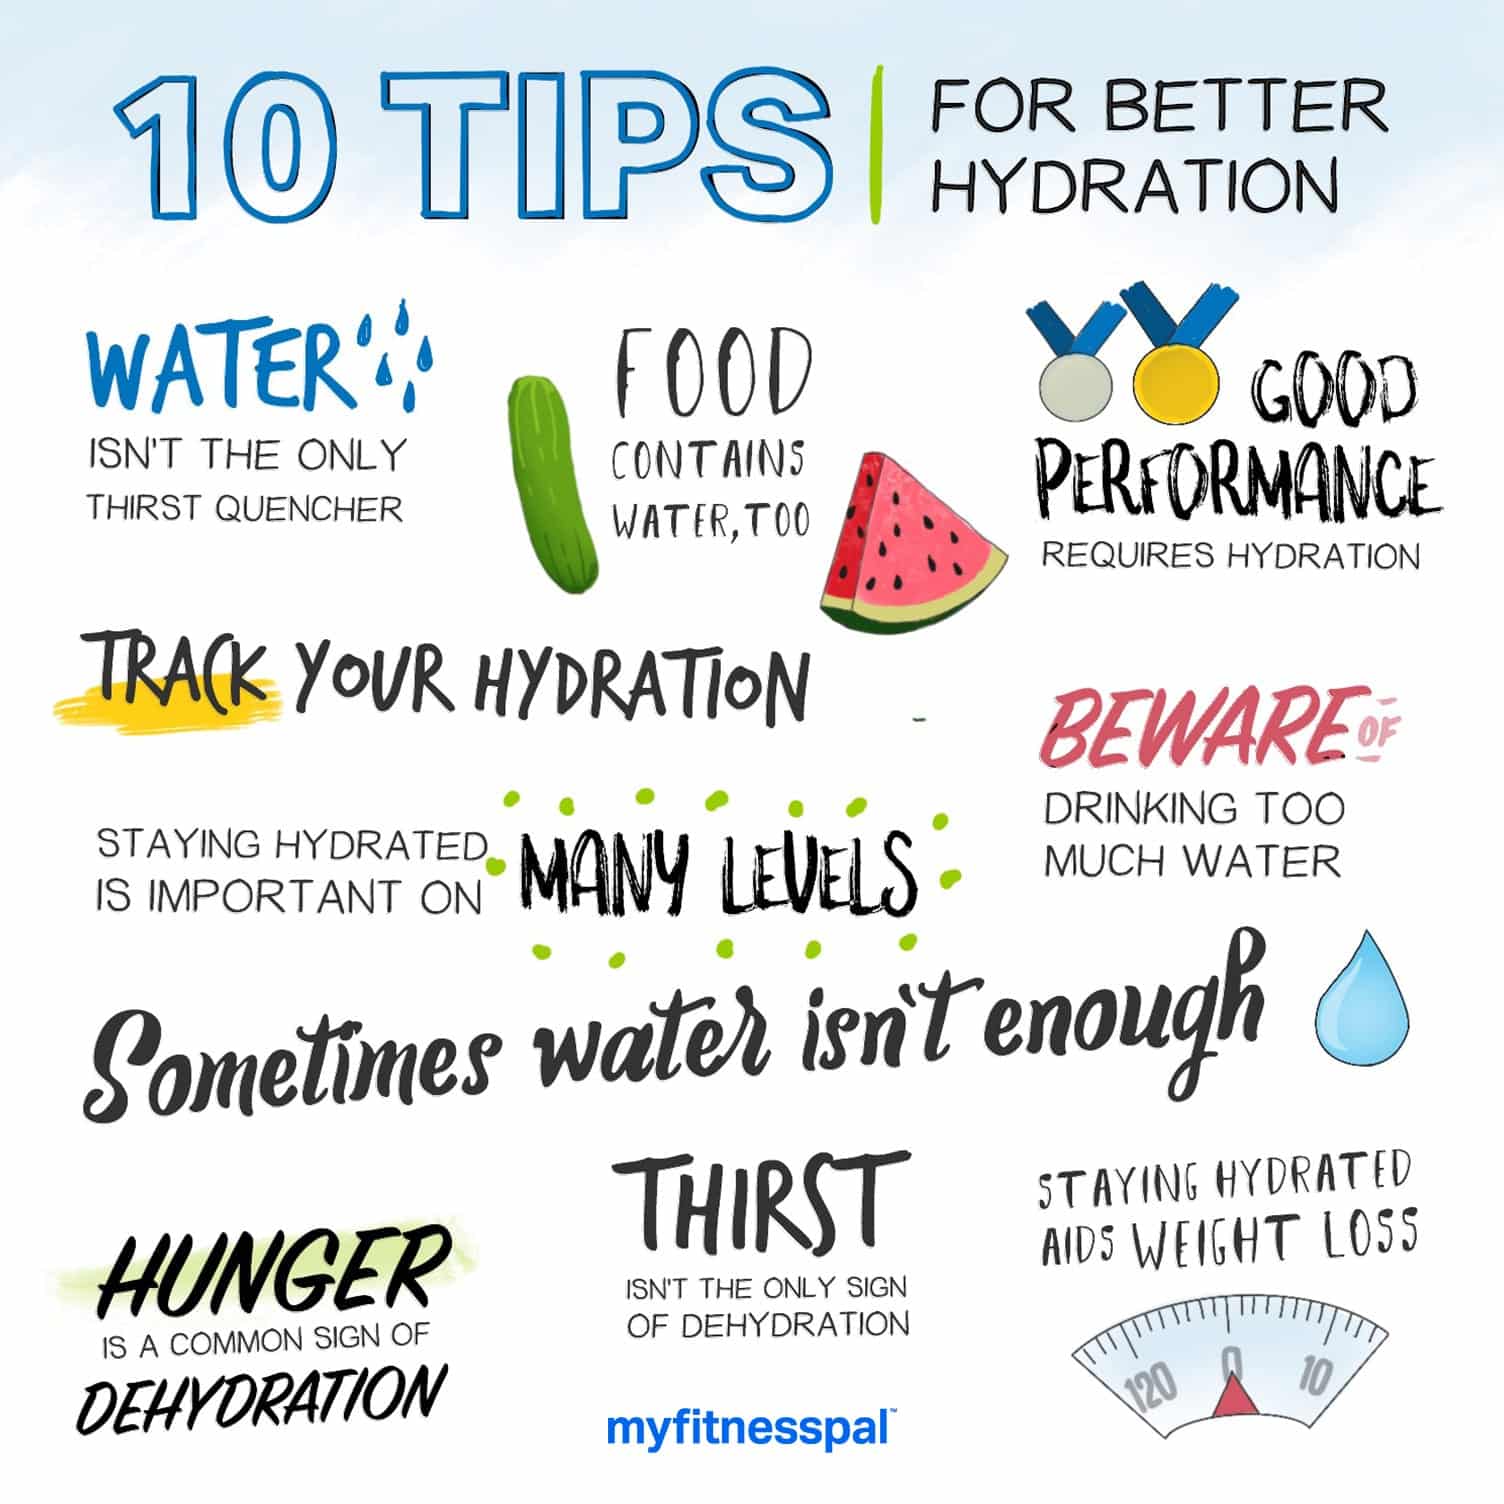 Hydration strategies for reducing fatigue